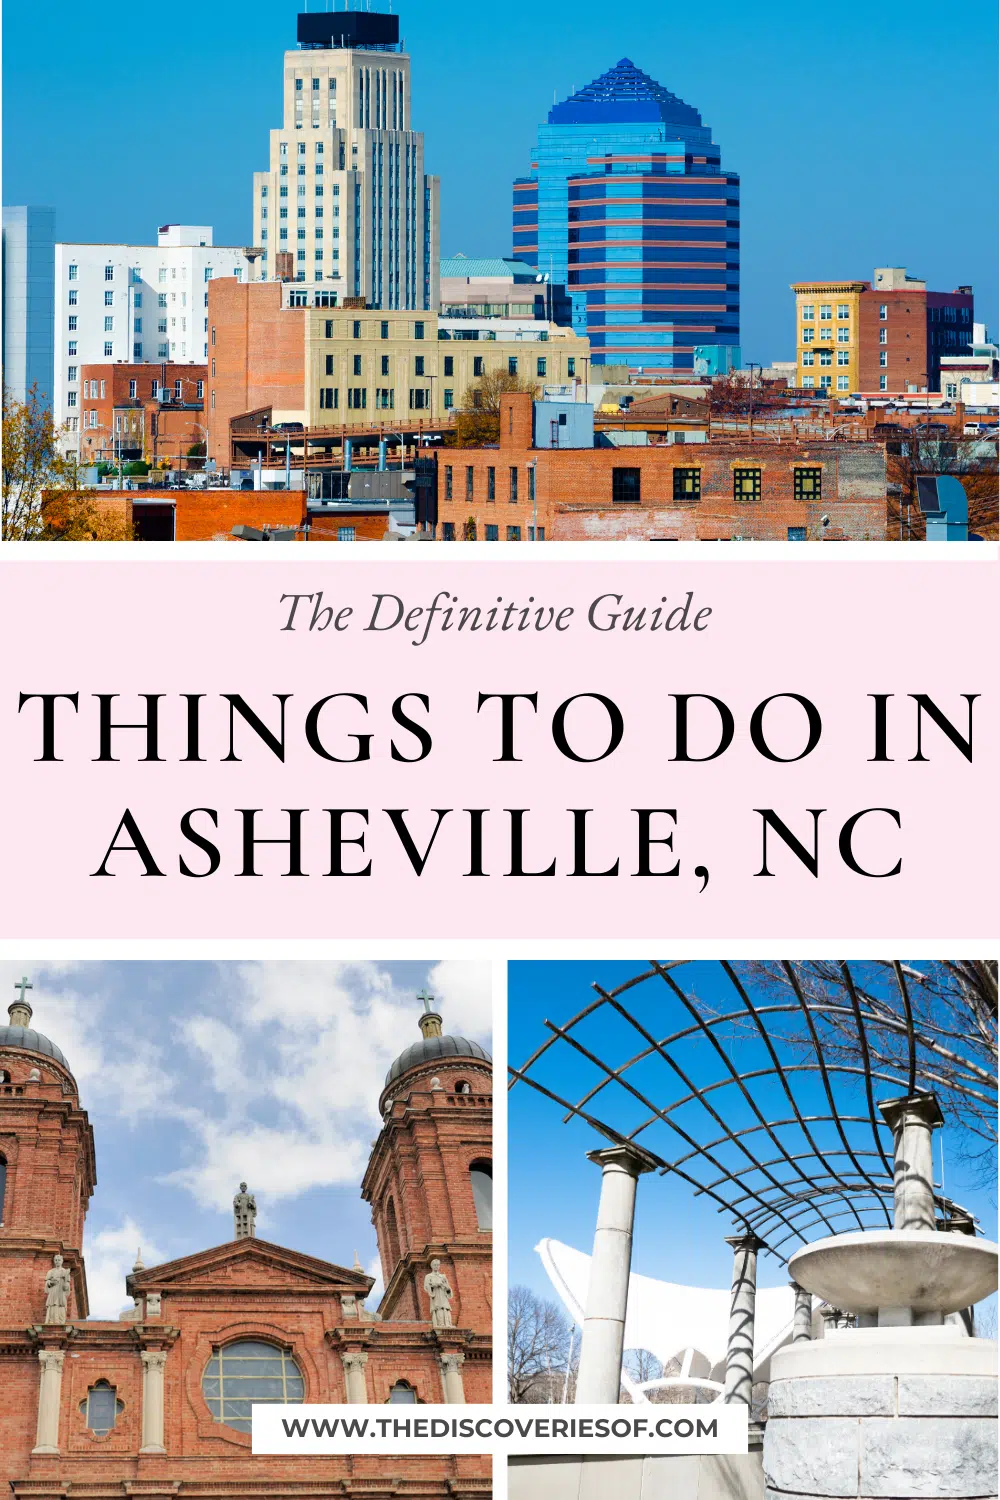 Things to Do in Asheville, NC